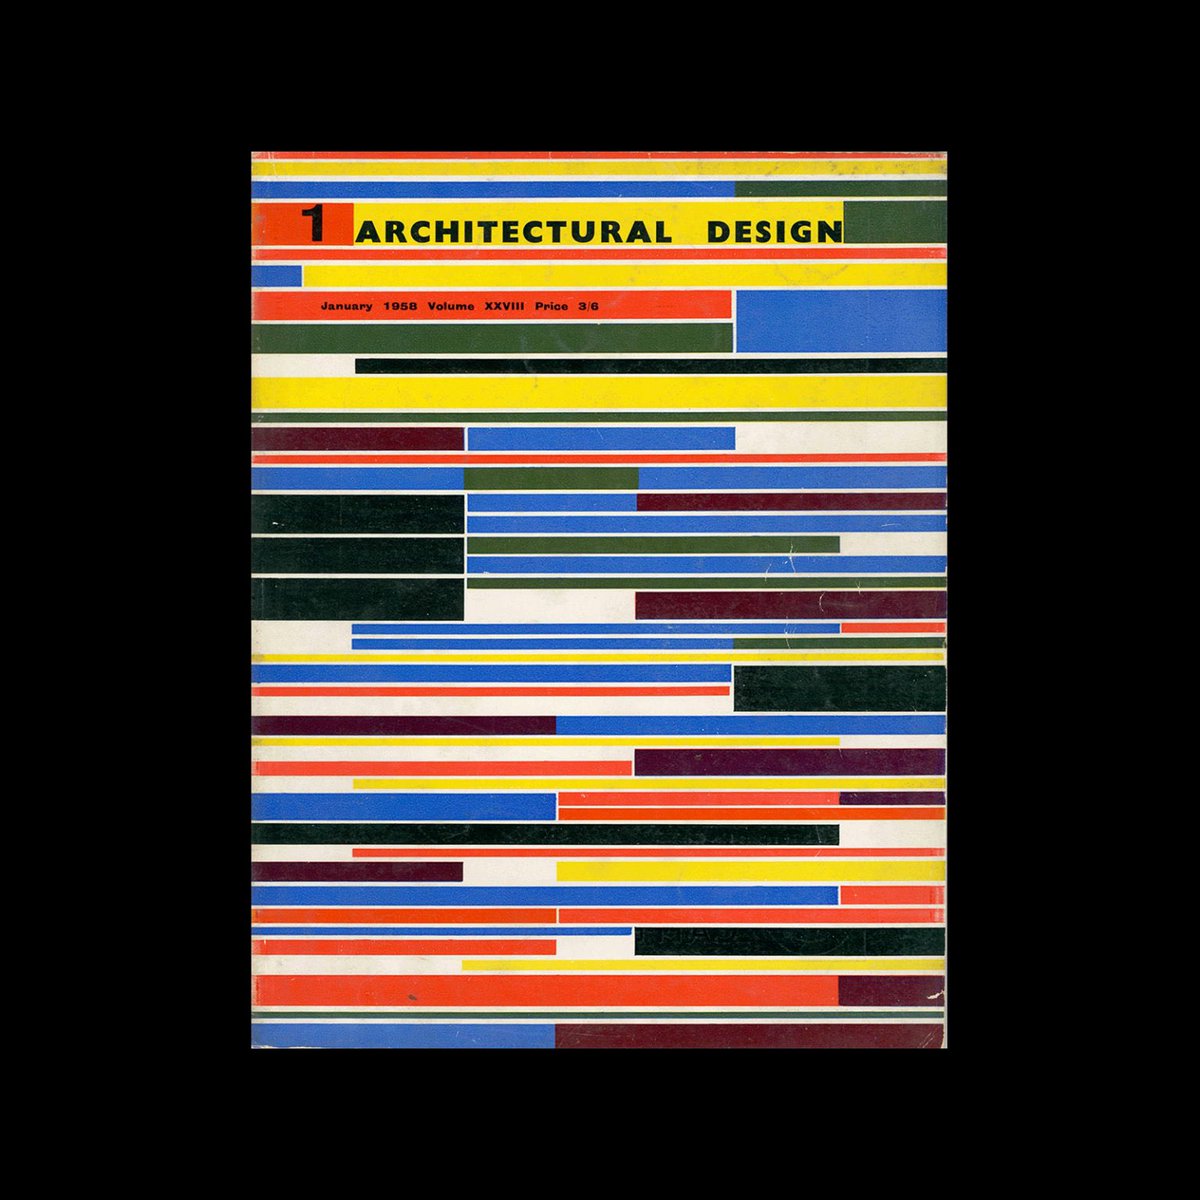 Architectural Design, January 1958. Cover design by Theo Crosby #theocrosby designreviewed.com/artefacts/arch…